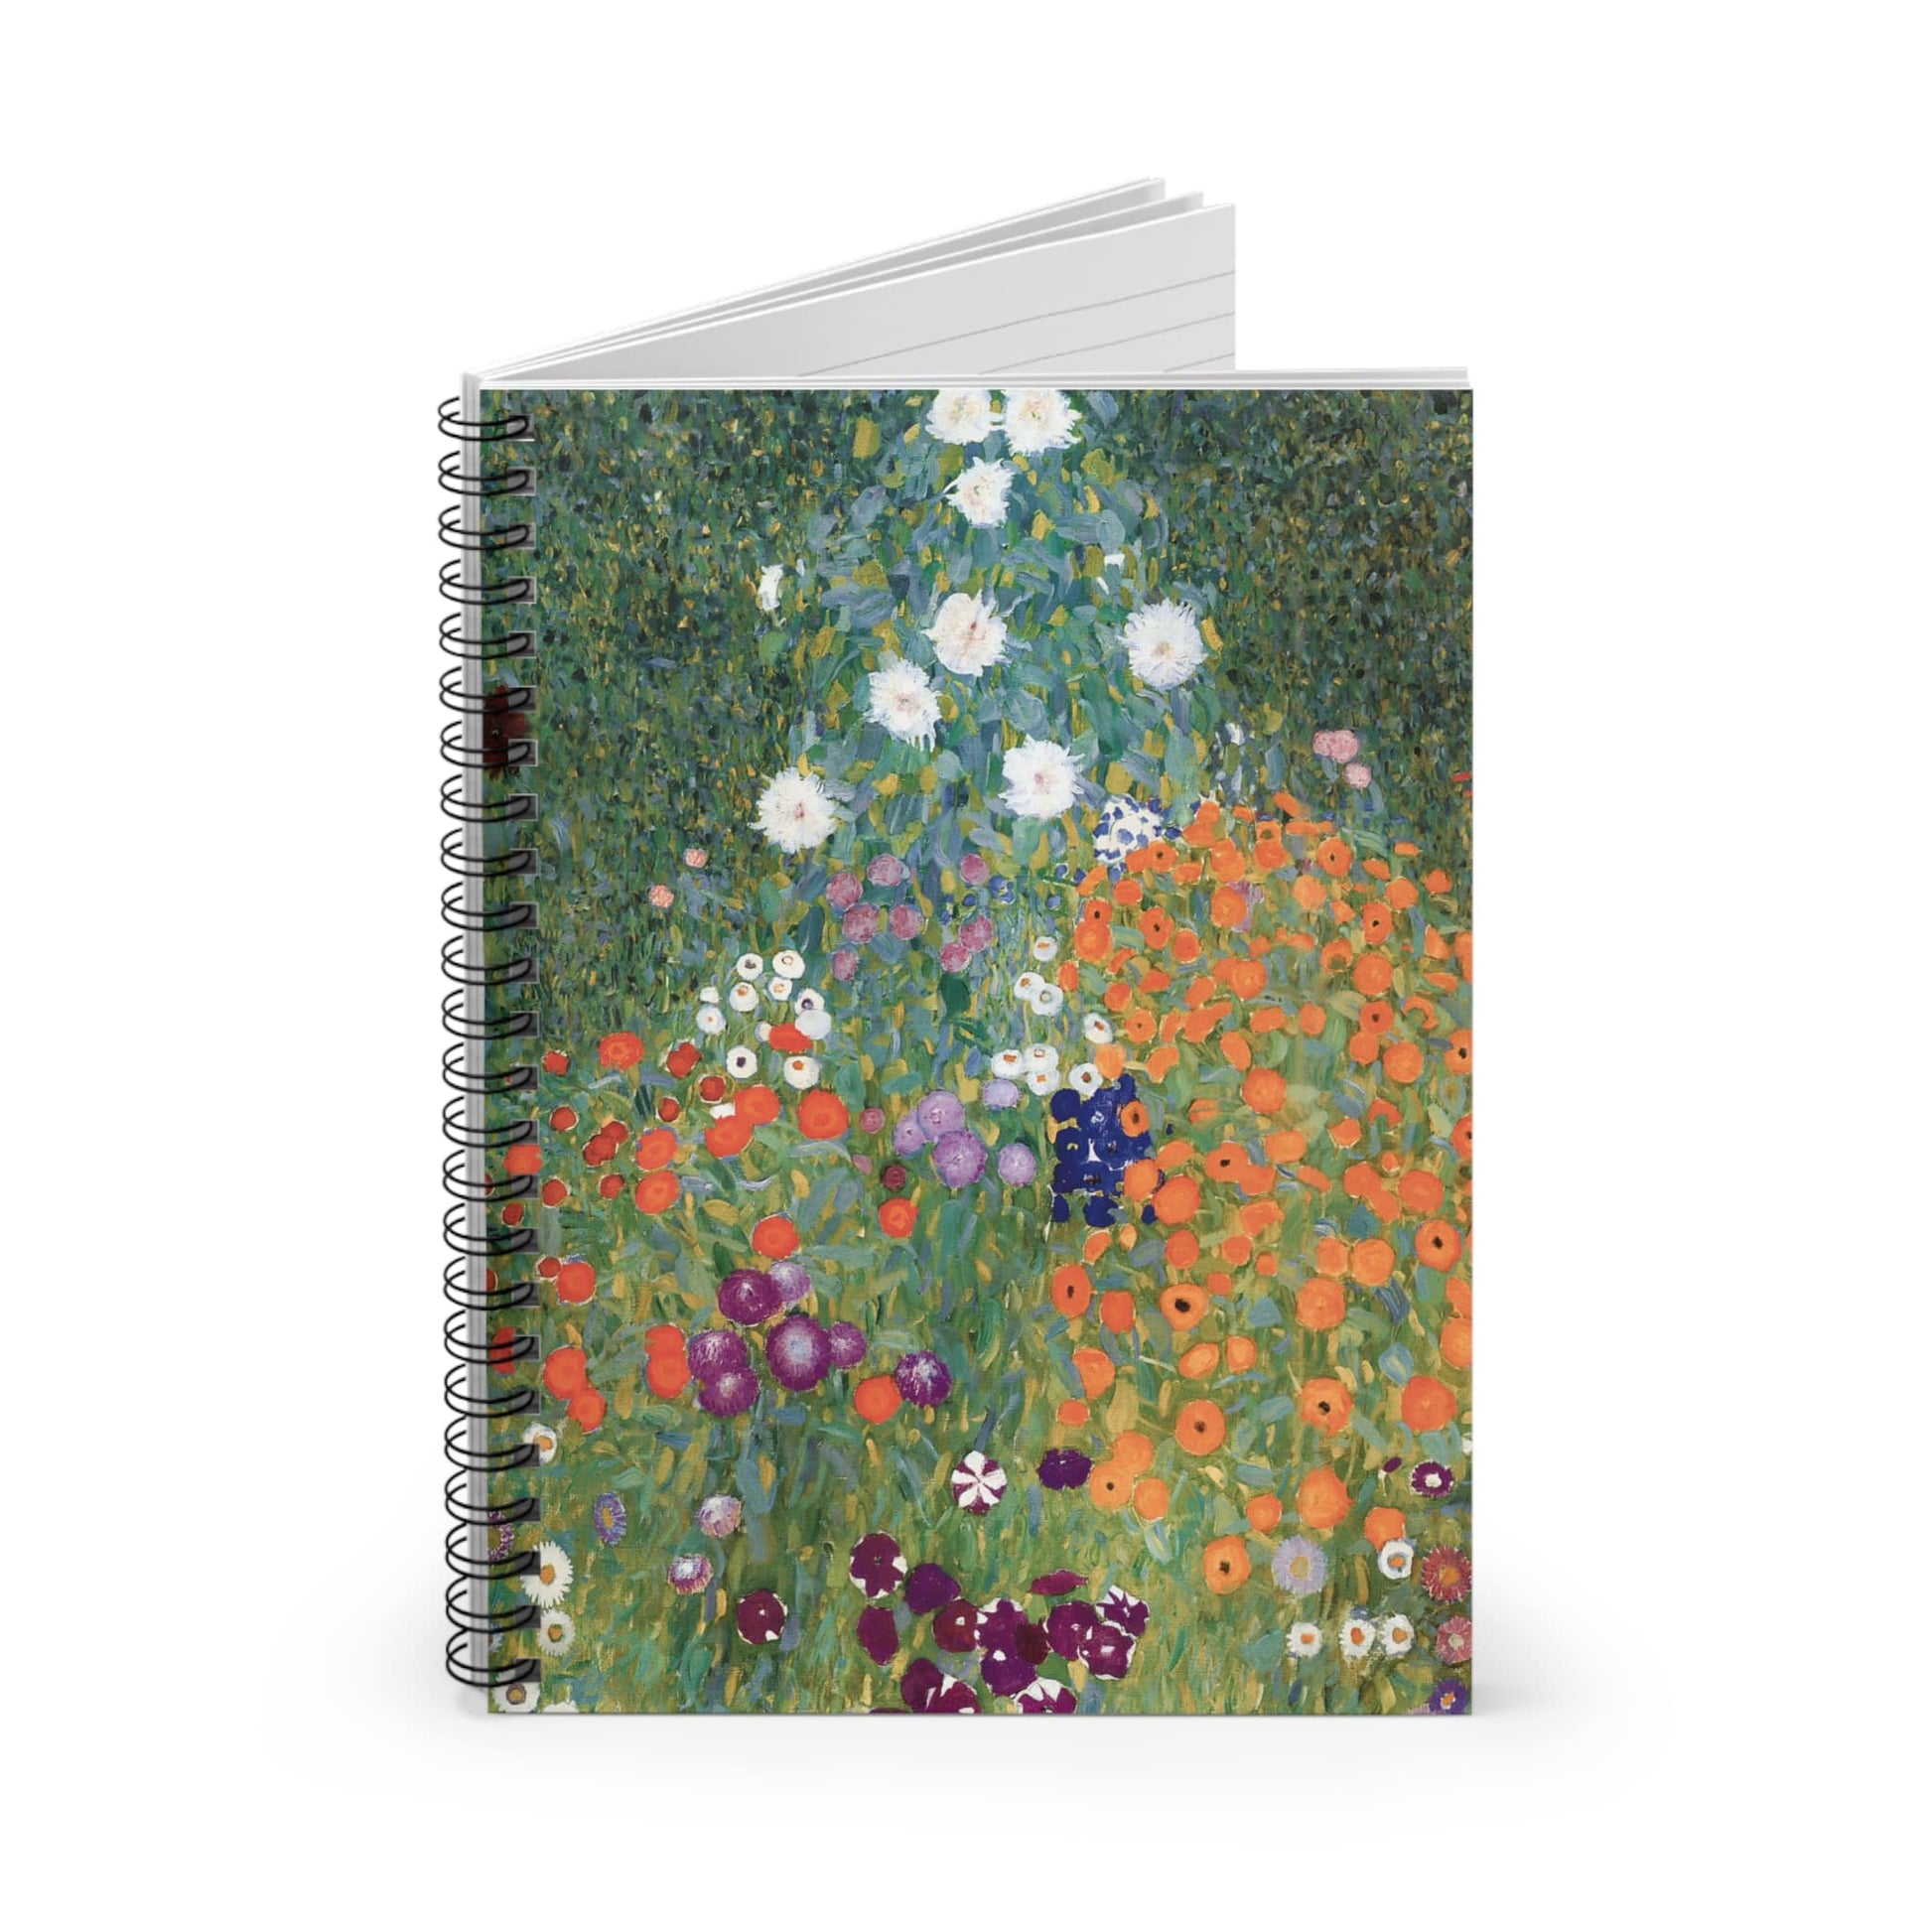 Beautiful Flowers Spiral Notebook Standing up on White Desk